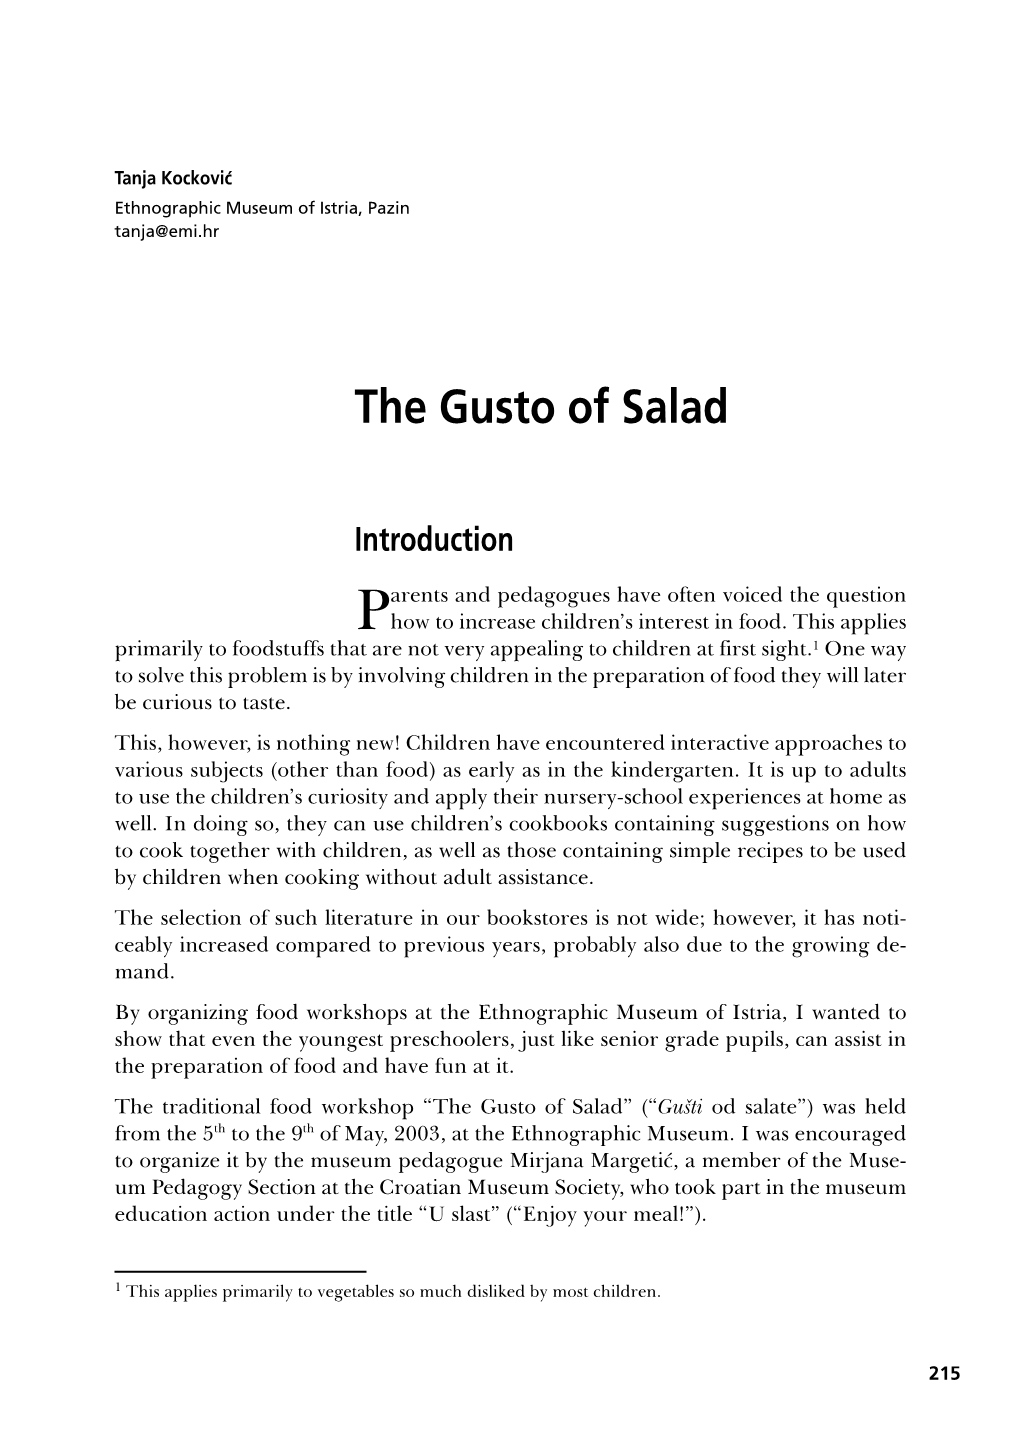 The Gusto of Salad